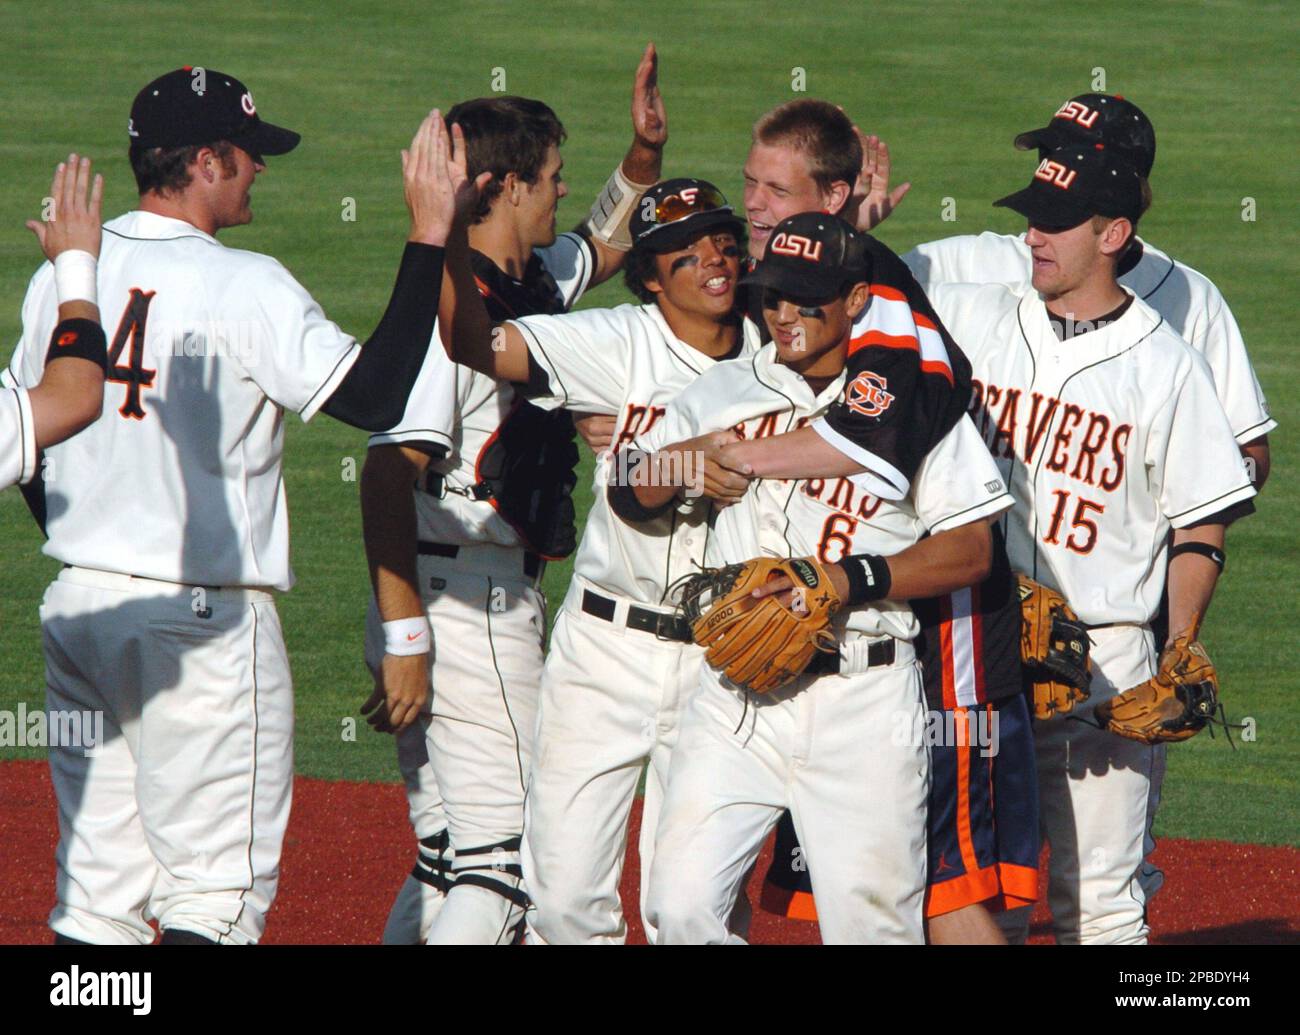 Oregon State players including Darwin Barney (6), Jonathan Casey, and Joey  Wong, left center, celebrate their 8-2 win against Michigan in the NCAA  Super Regional baseball playoff in Corvallis, Ore., Monday June